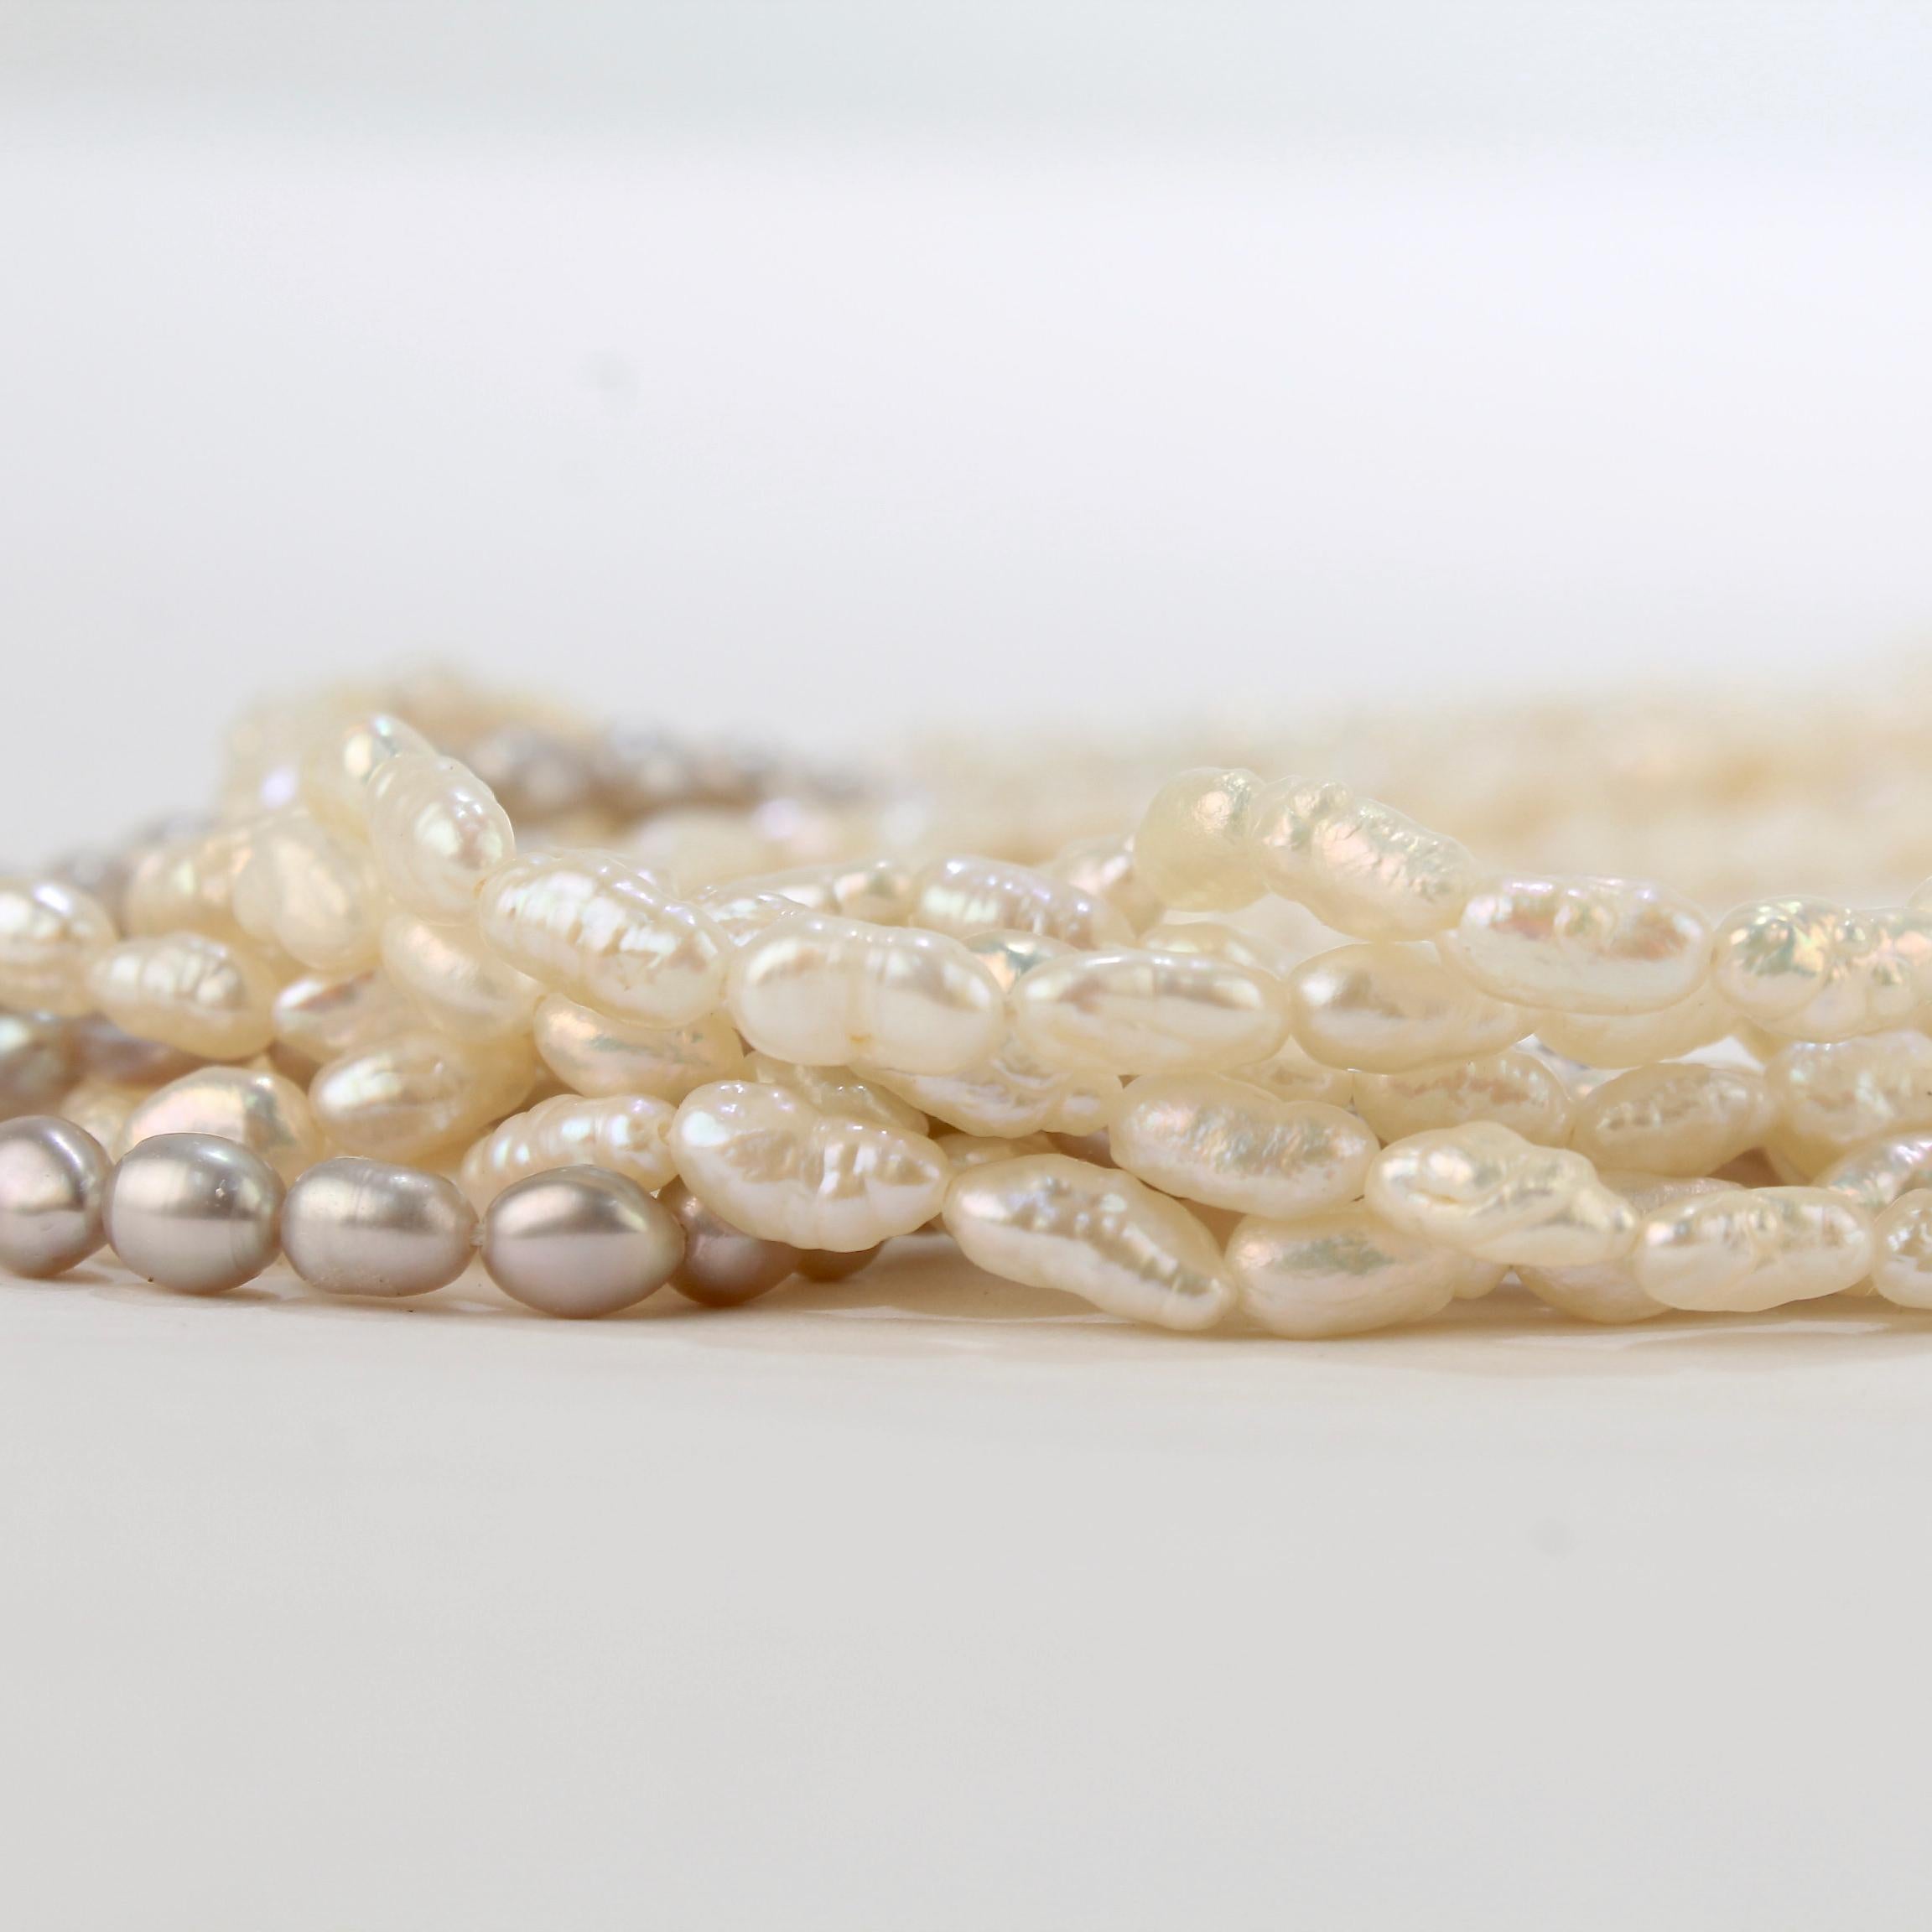 Modernist Retro Multi-Strand Freshwater Pearl Necklace with a Brutalist 14k Gold Clasp